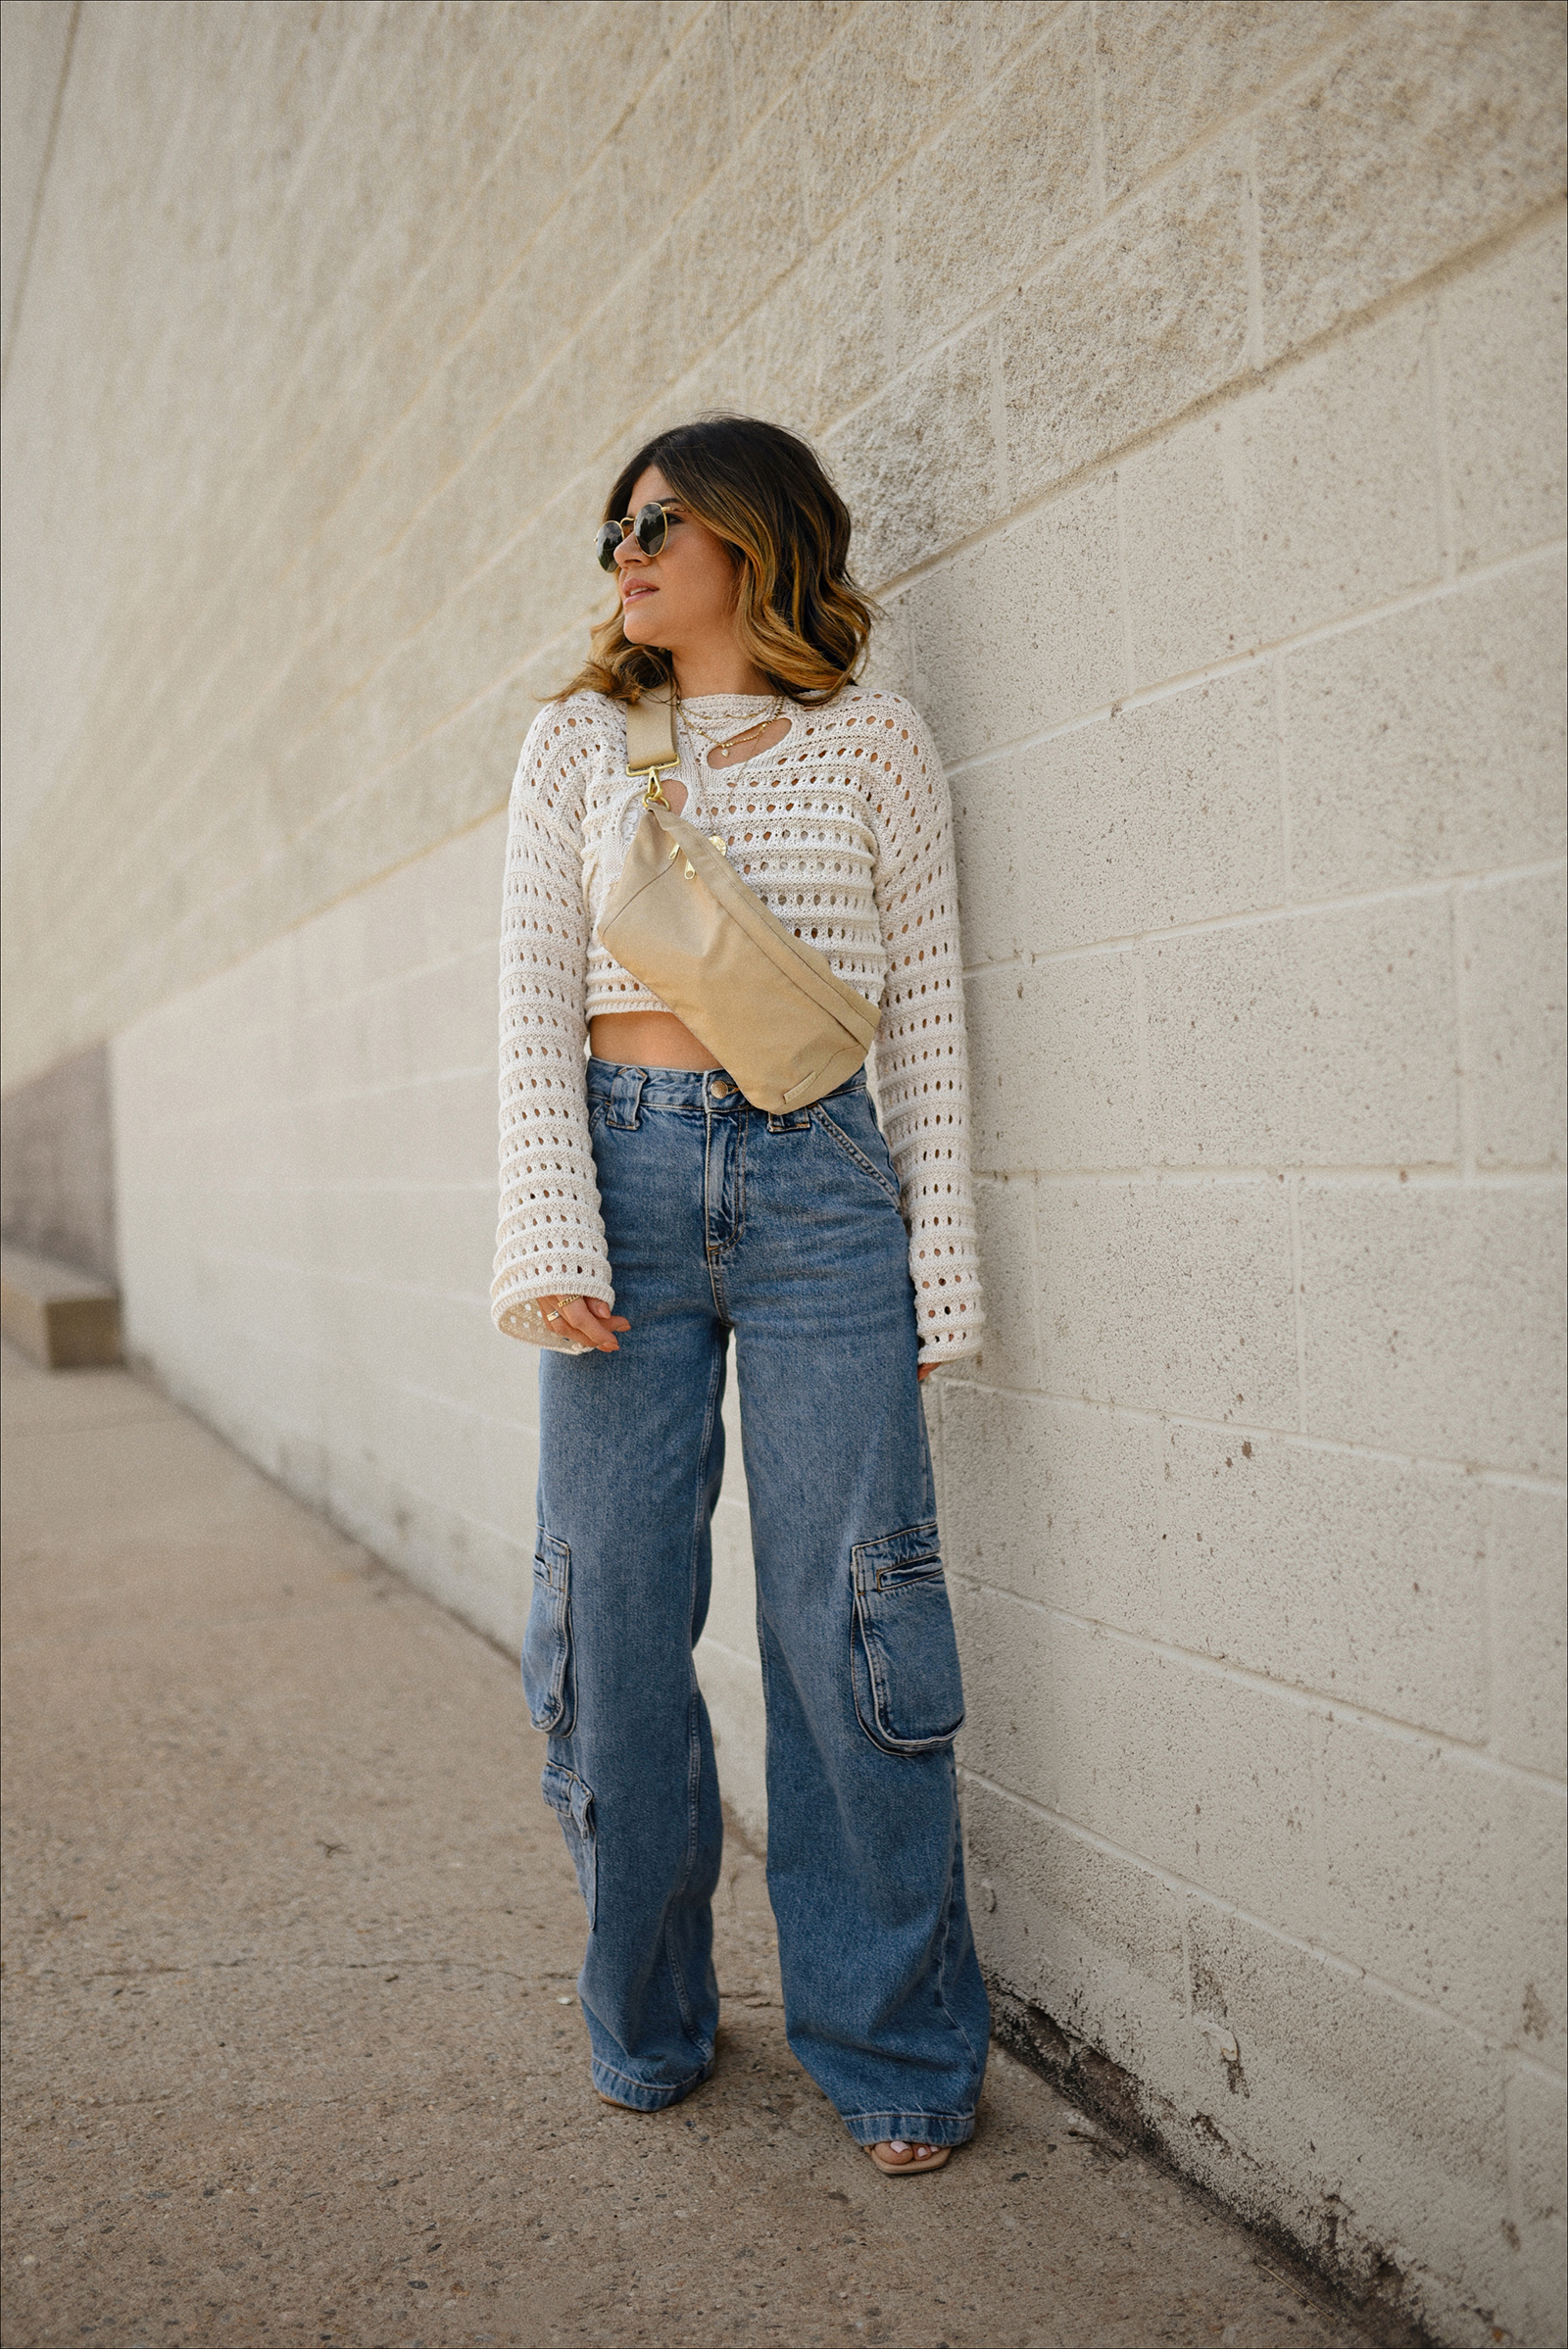 https://chictalkch.com/wp-content/uploads/2023/06/Carolina-Hellal-of-Chic-Talk-wearing-denim-cargo-jeans-for-summer-via-Mango-knit-sweater-from-Amazon-fashion-and-a-fanny-pack-via-Canvelle-1.jpg